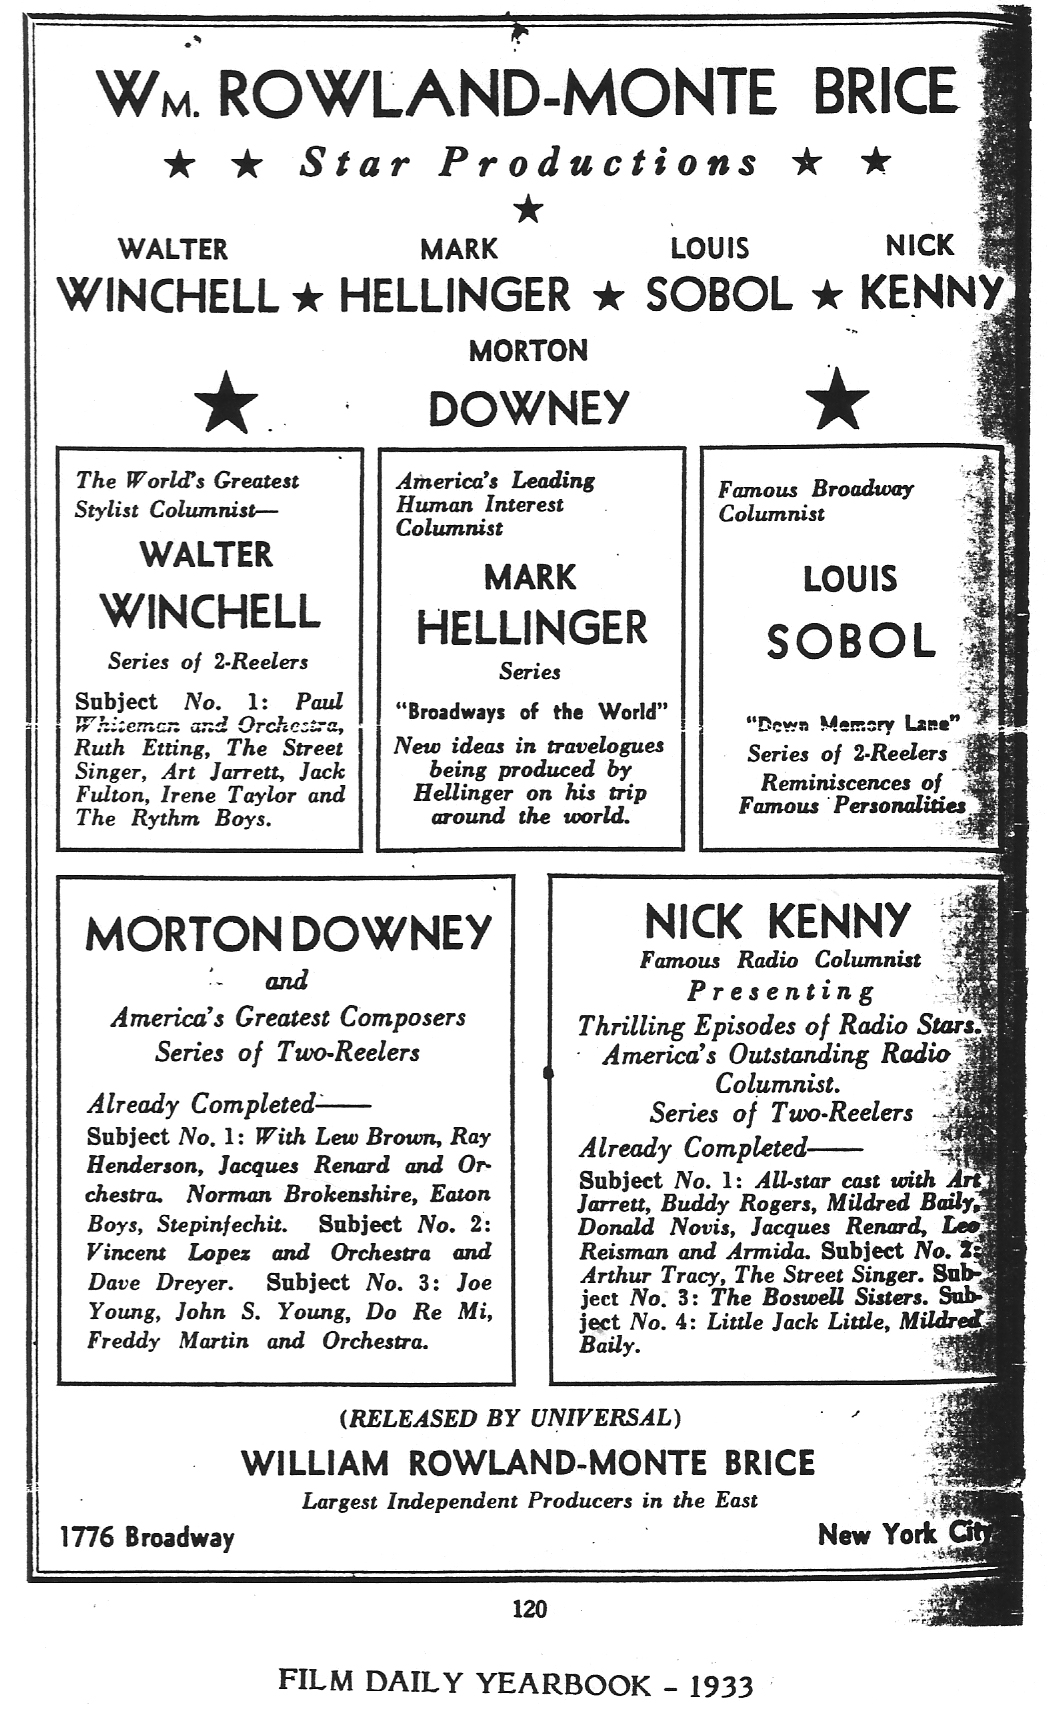 Film Daily Yearbook - 1933